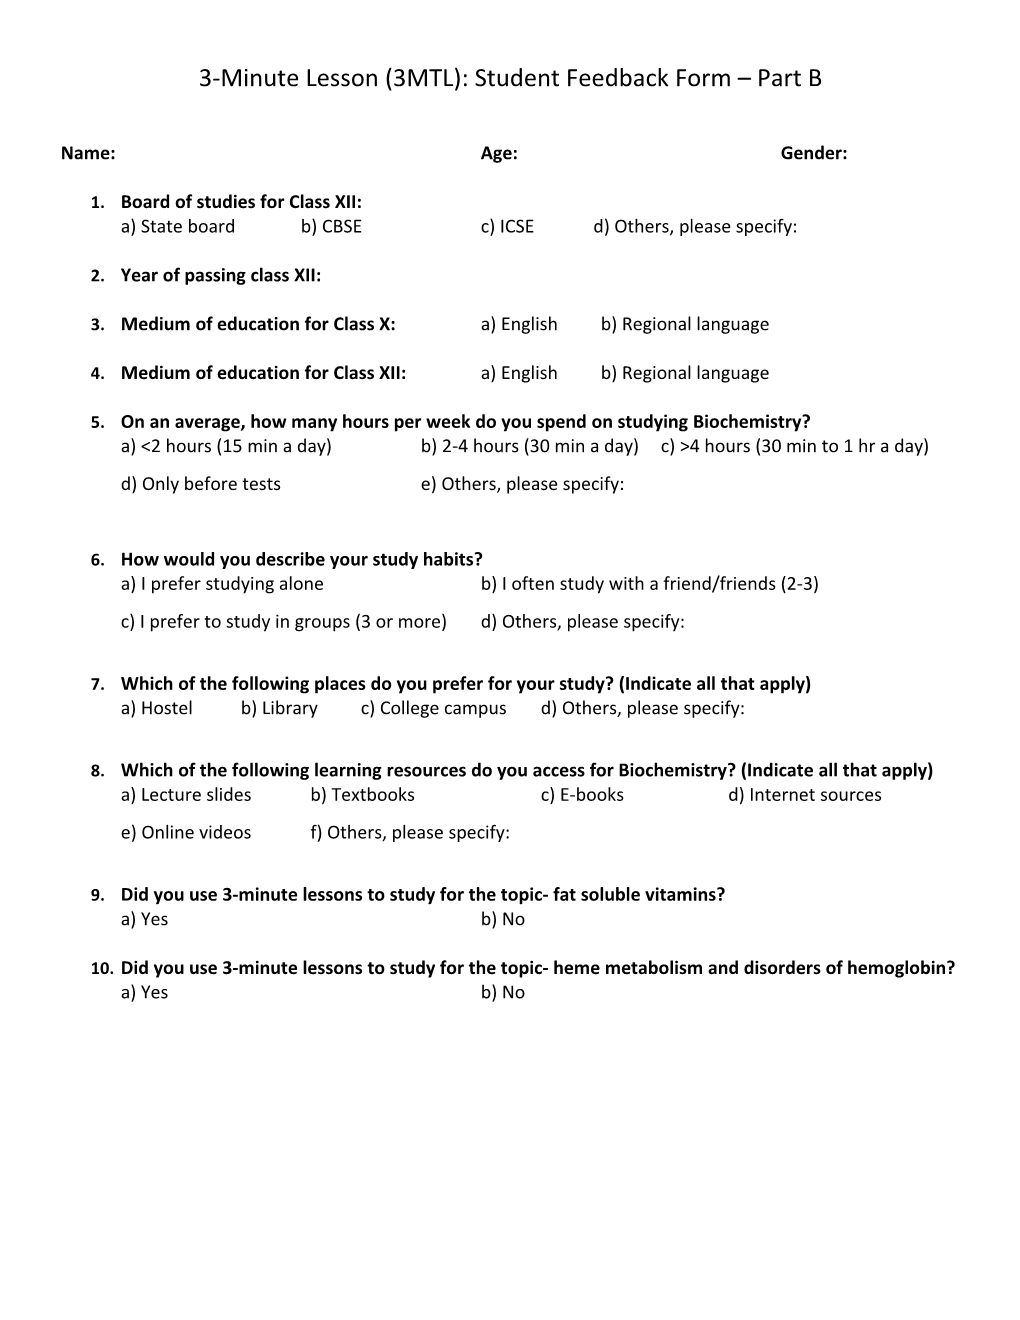 3-Minute Lesson (3MTL): Student Feedback Form Part B